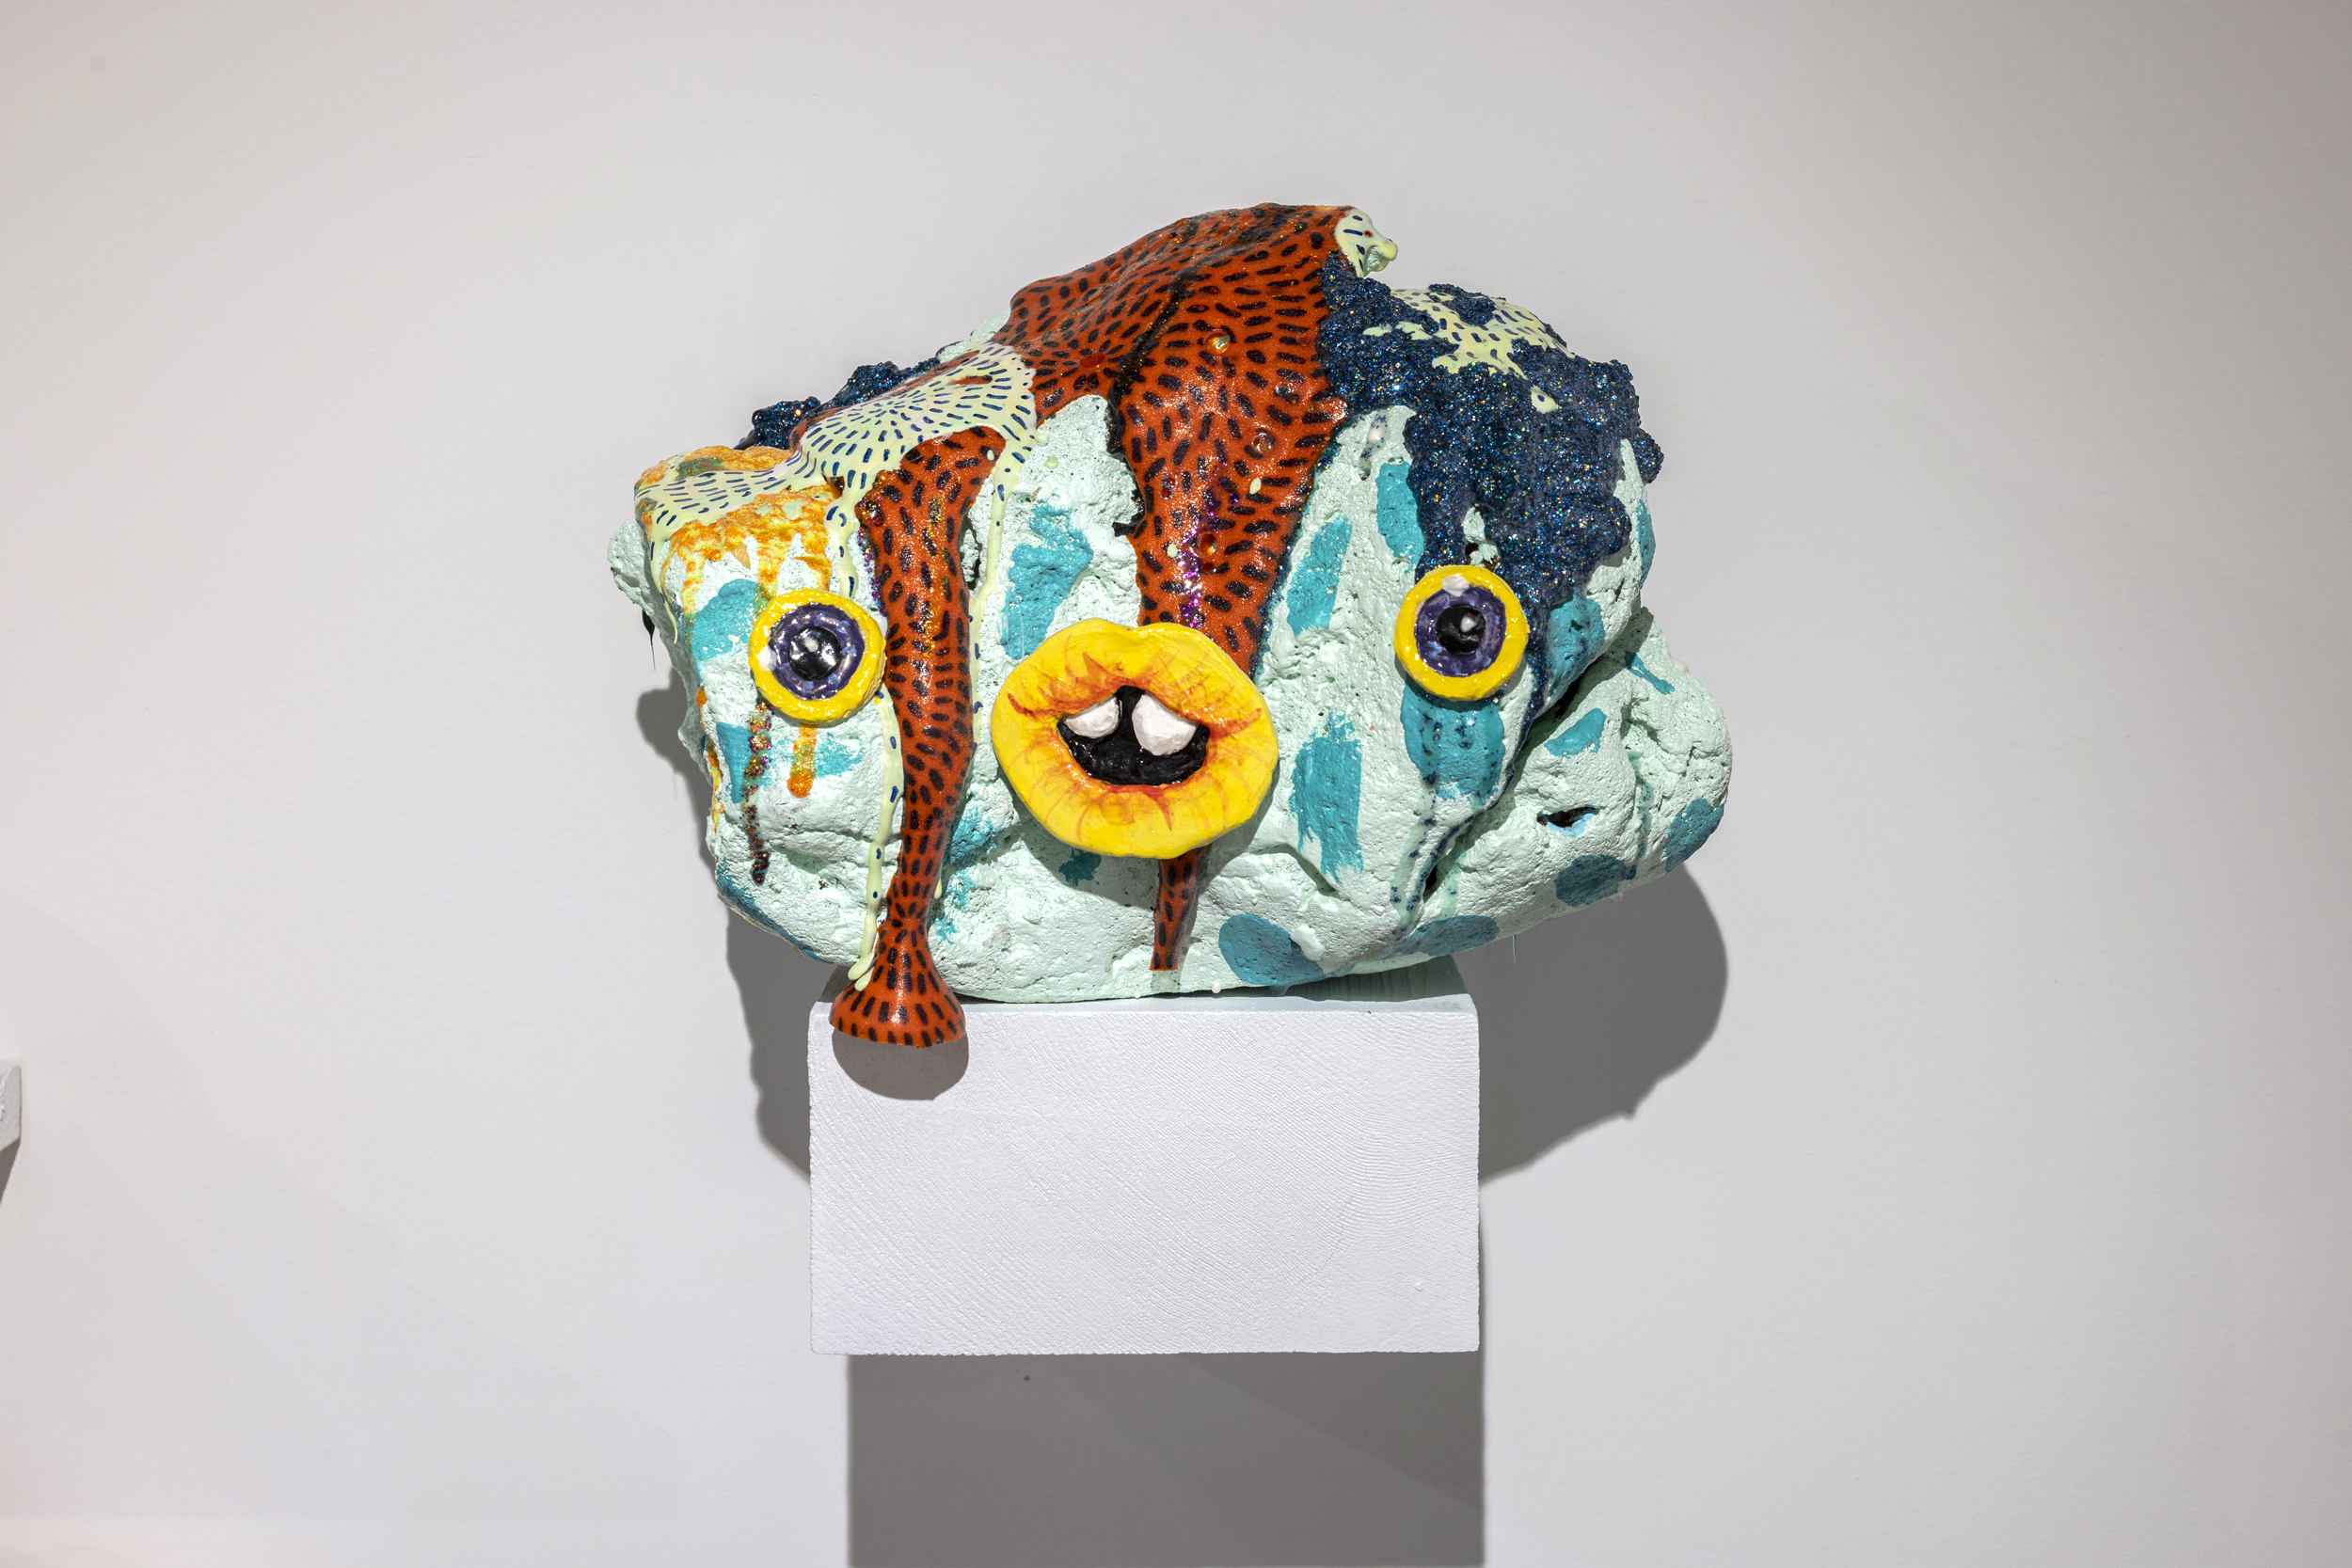 Milagros, Crud Buddies, 2022. Ocean-bound foam from Mississippi River, ceramic, acrylic, pigmented resin, and rhinestones. Courtesy of Ten Nineteen.